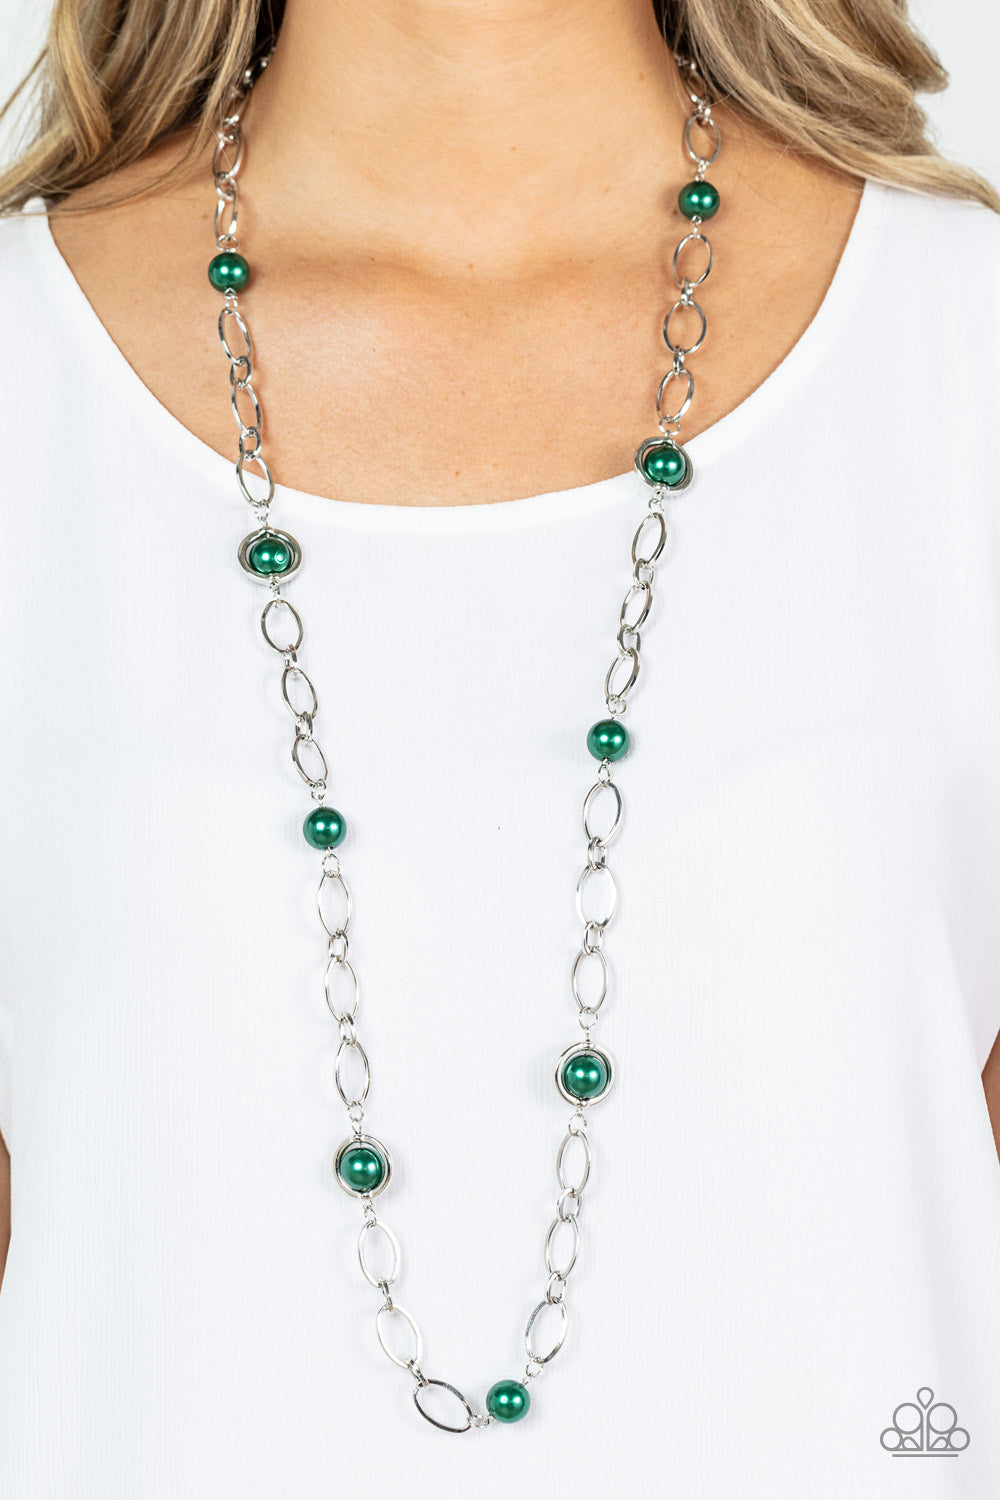 Fundamental Fashion - Green Emerald Pearl and Silver Necklace - Paparazzi Accessories - Sections of oversized silver chain links and bubbly Emerald pearls delicately connect across the chest, resulting in a refined display. Features an adjustable clasp closure. Sold as one individual stylish fashion necklace. 